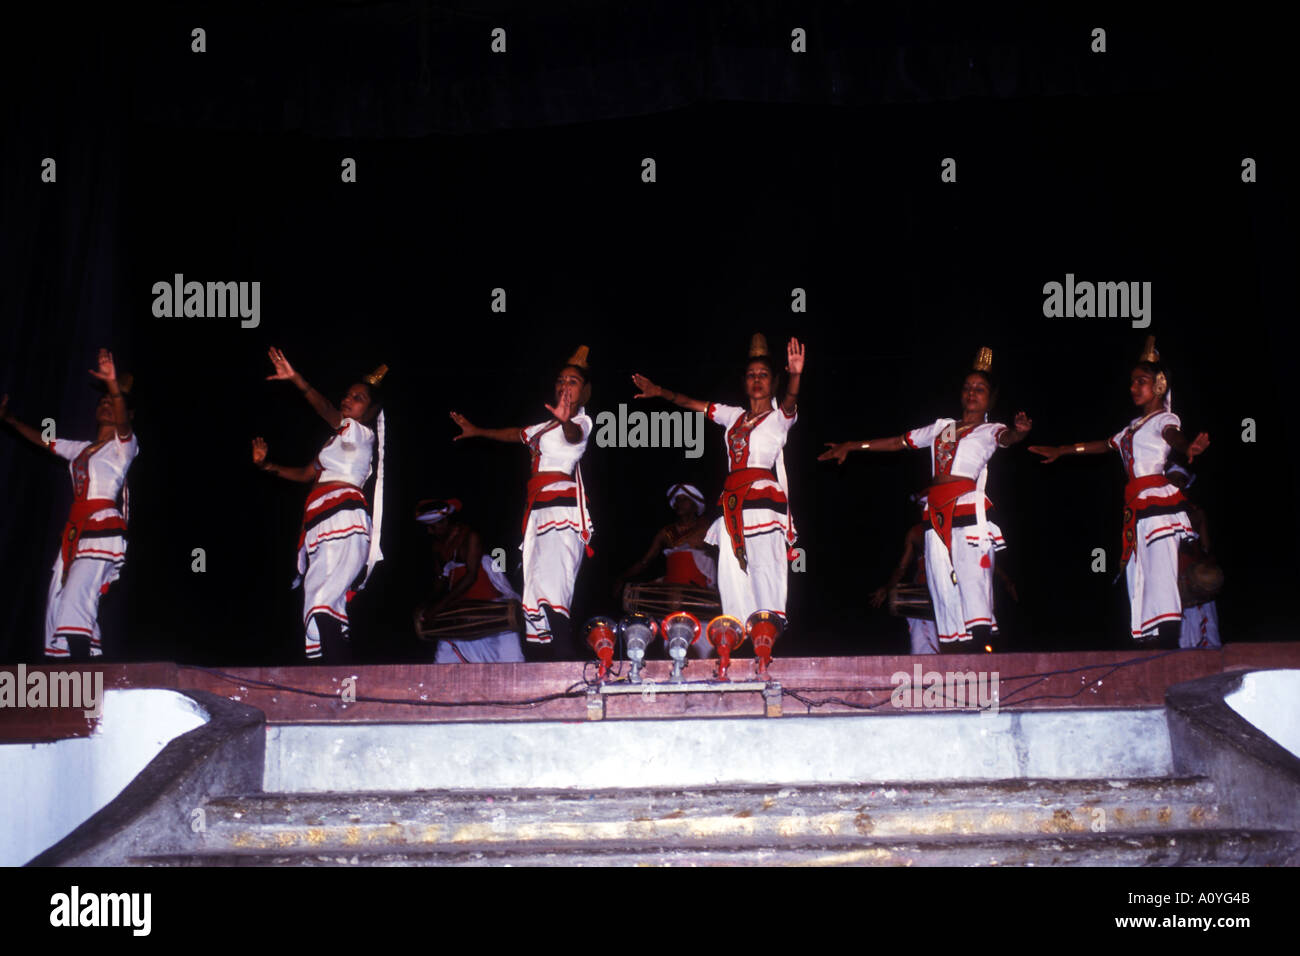 Sri Lankan dancing girls performs a traditional dance routine Stock Photo